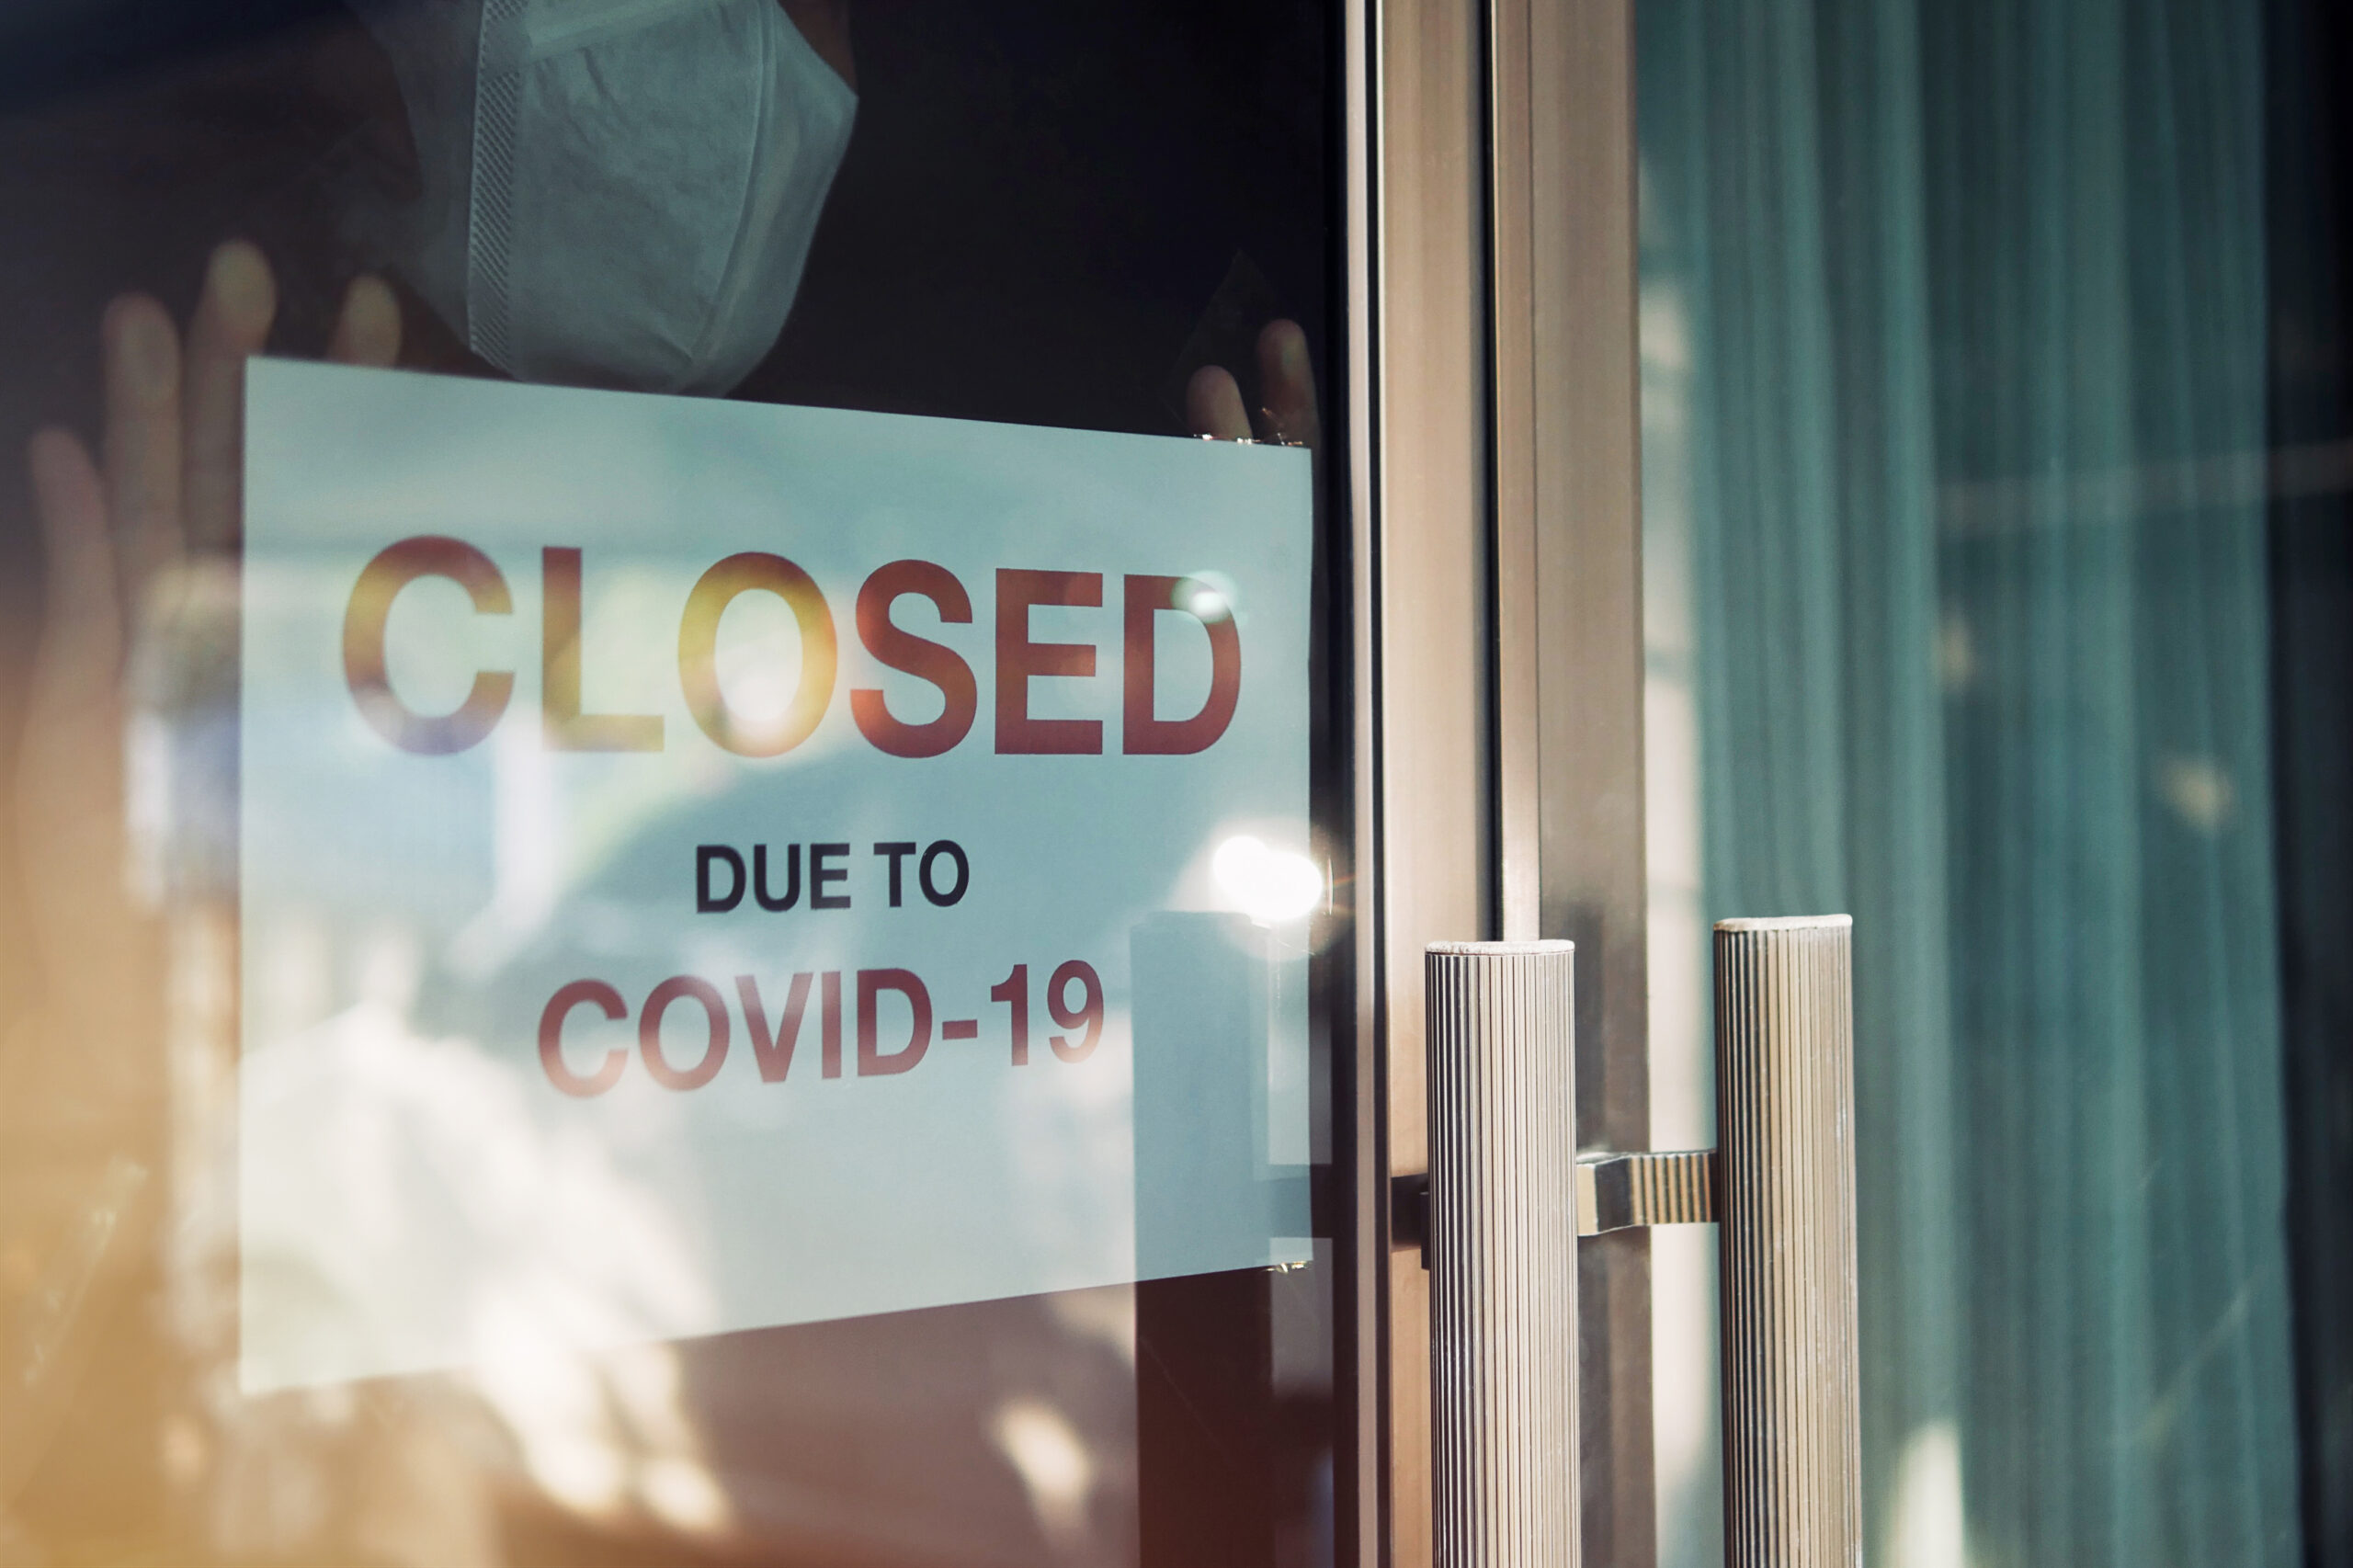 businesses closed due to COVID-19 lockdowns